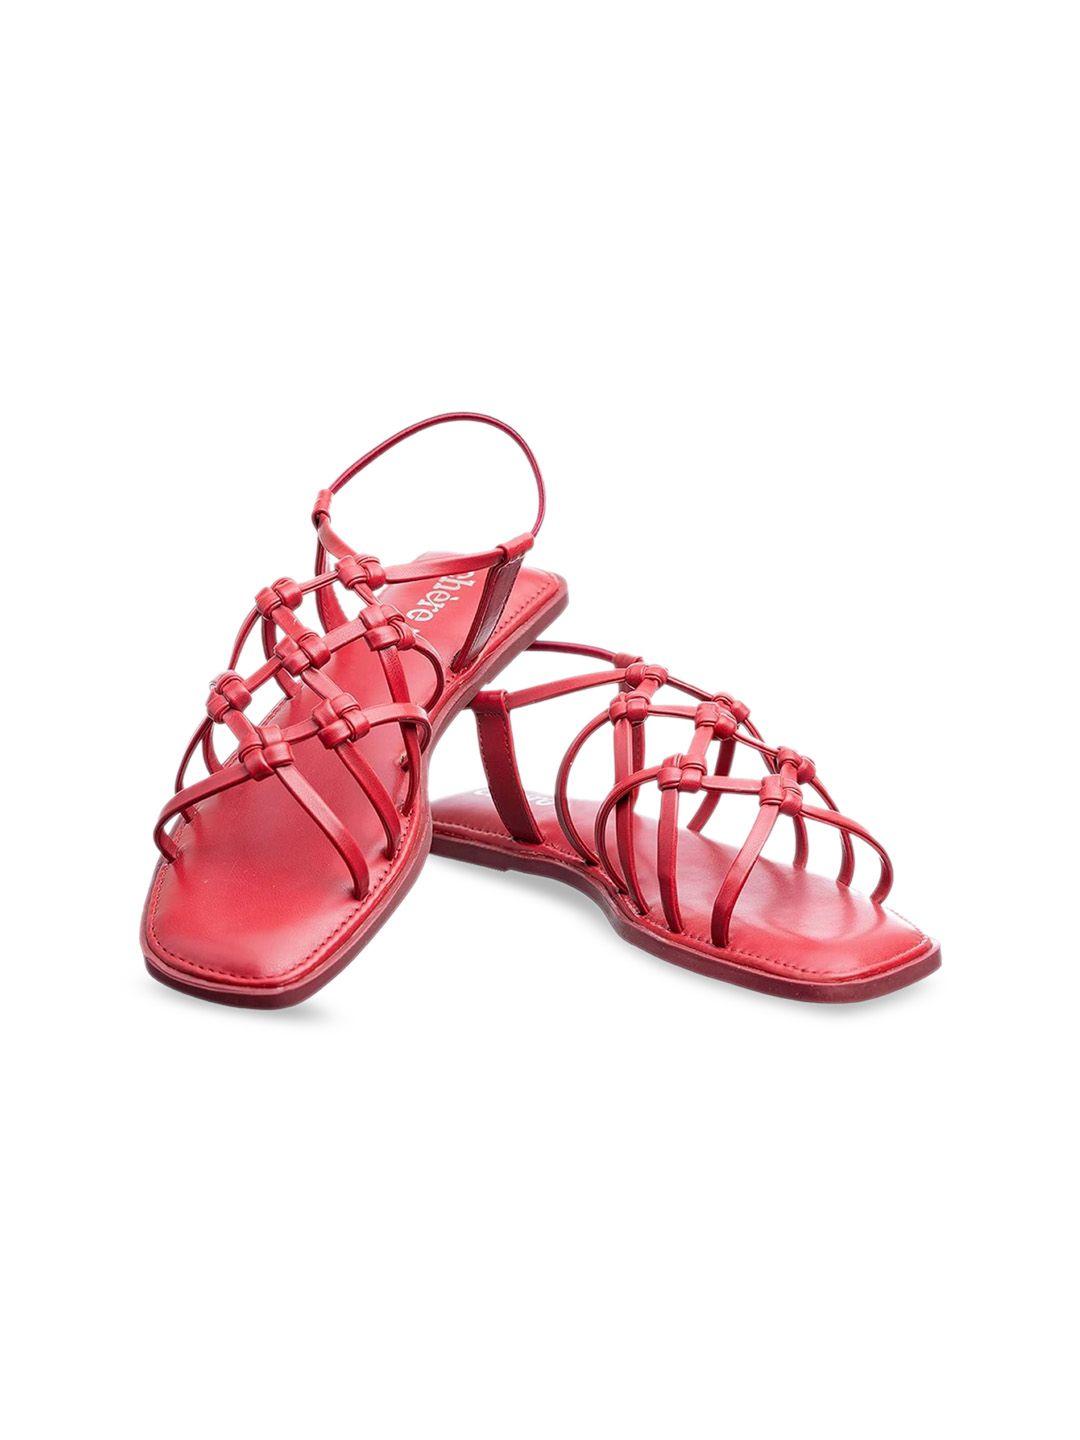 chere knotted open toe flats with backstrap